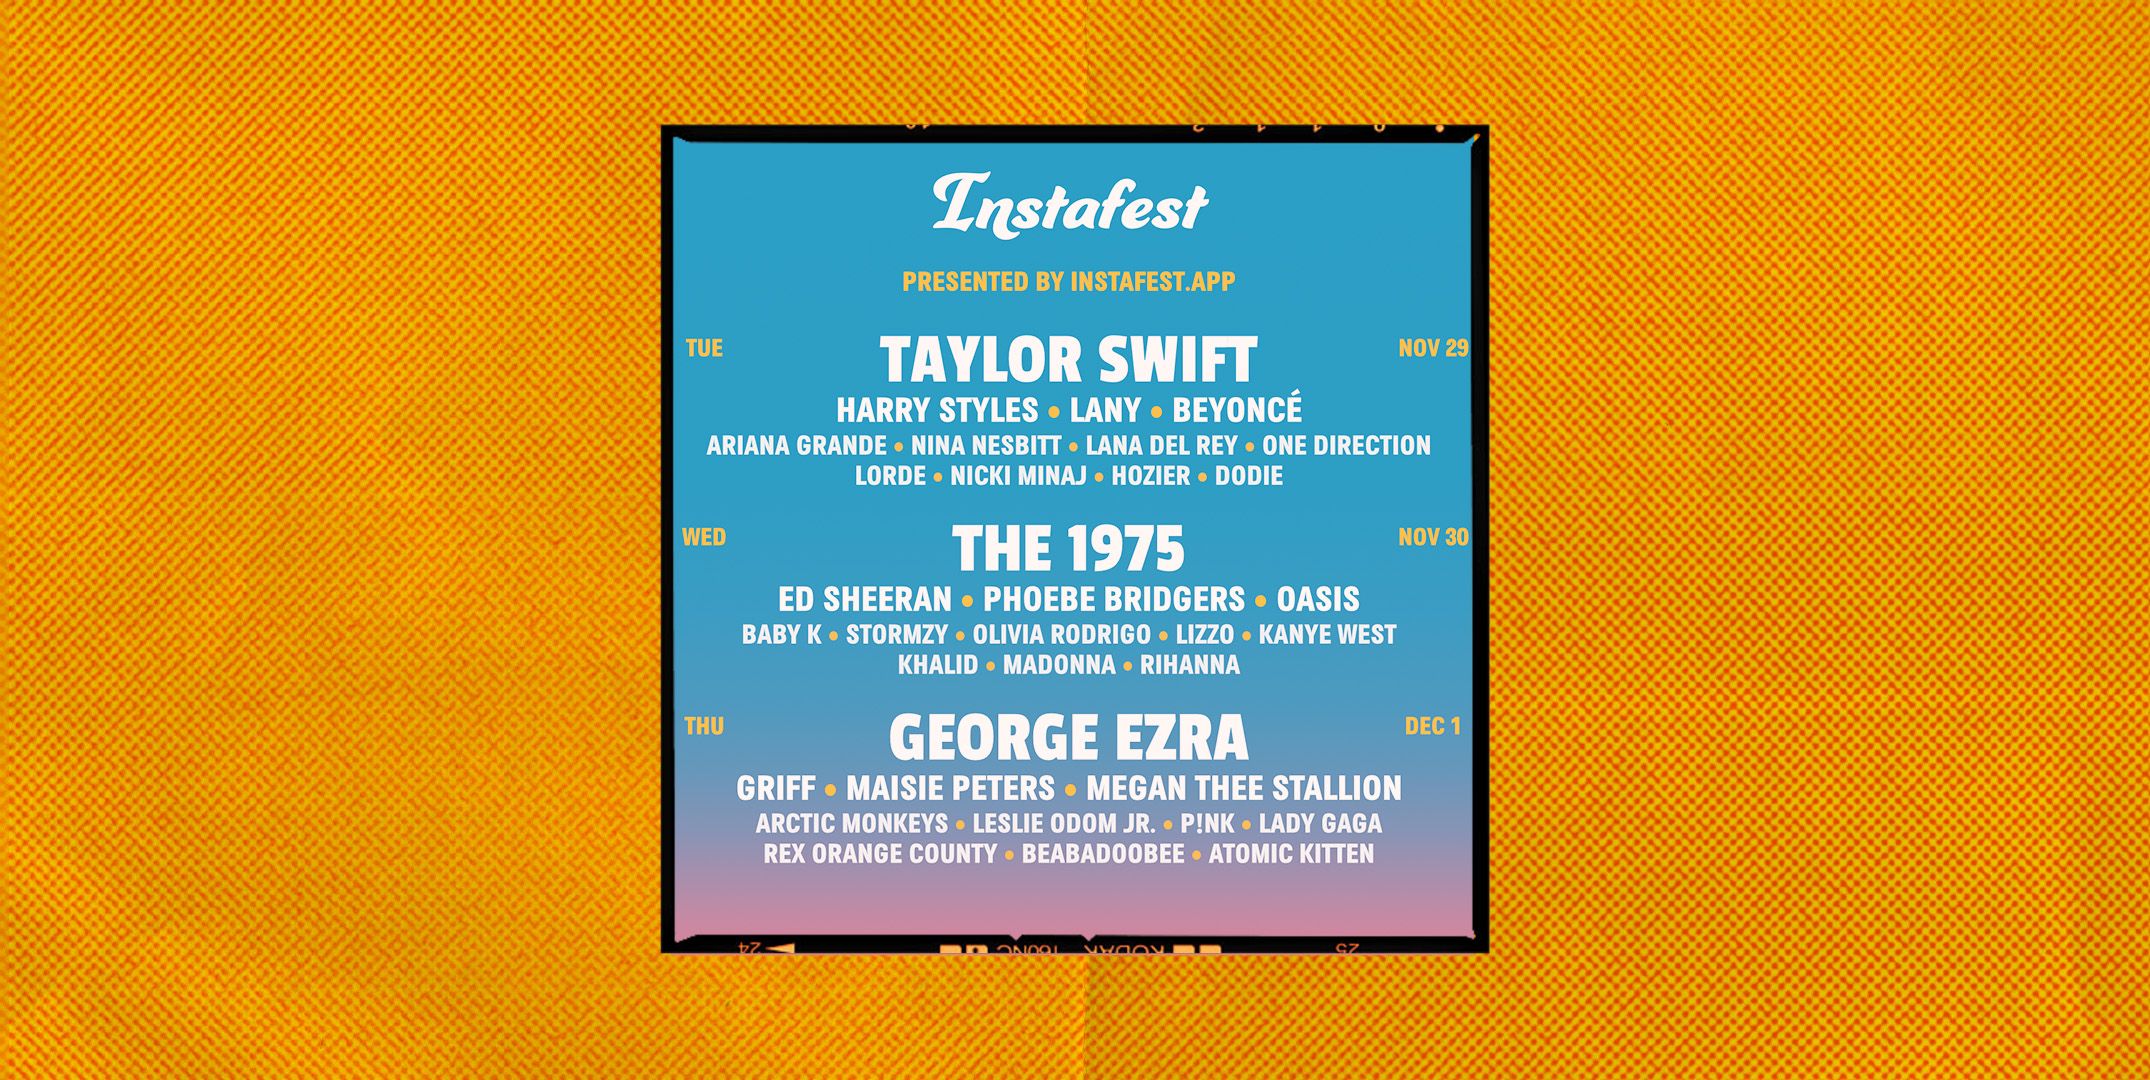 Spotify Instafest: to create your Spotify Instafest lineup